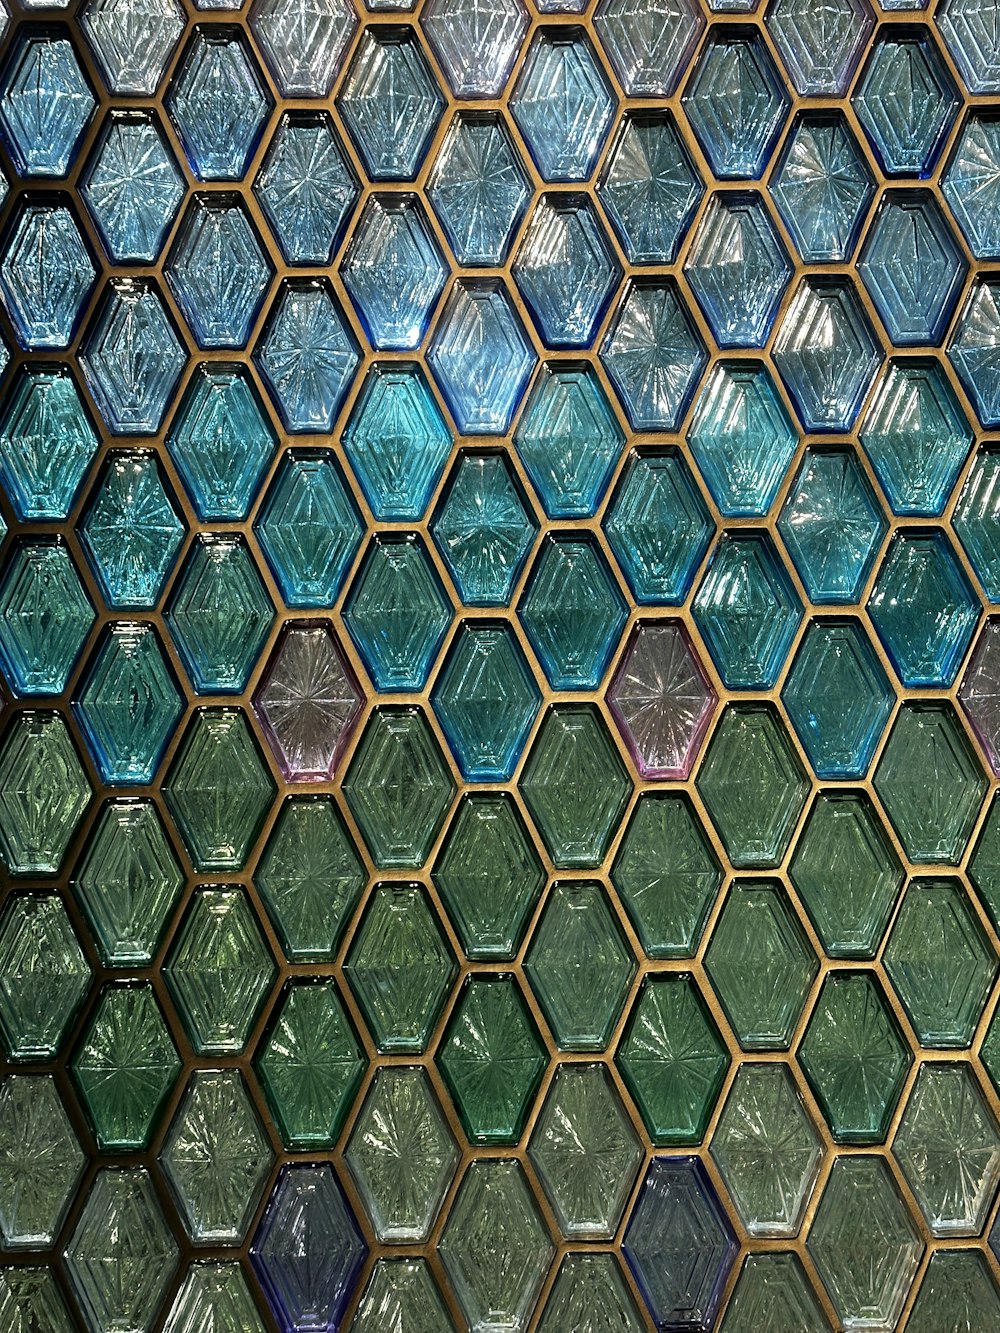 a close up of a glass window with a hexagonal pattern